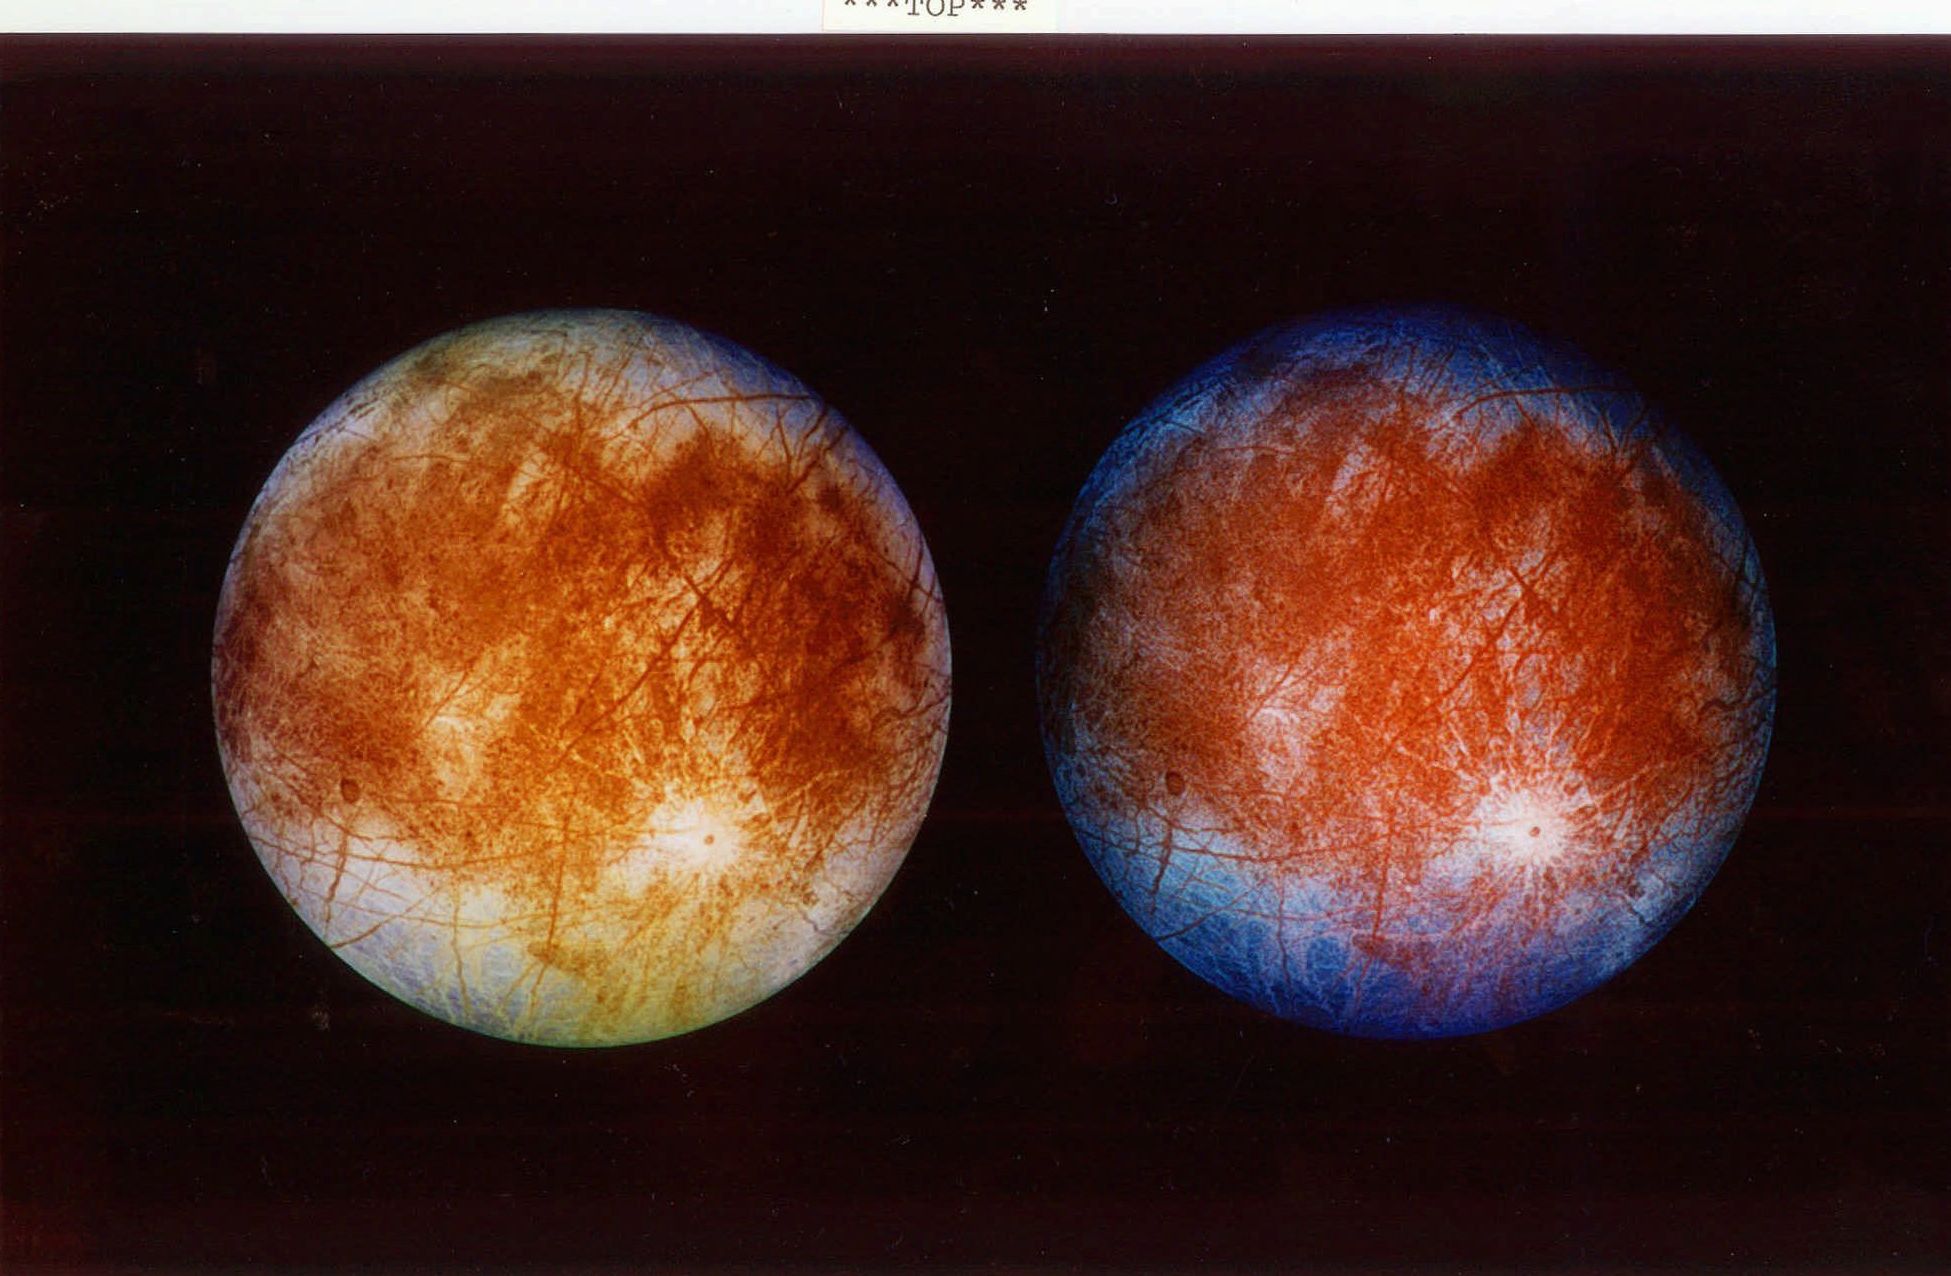 Two views of Jupiter's ice-covered moon, Europa